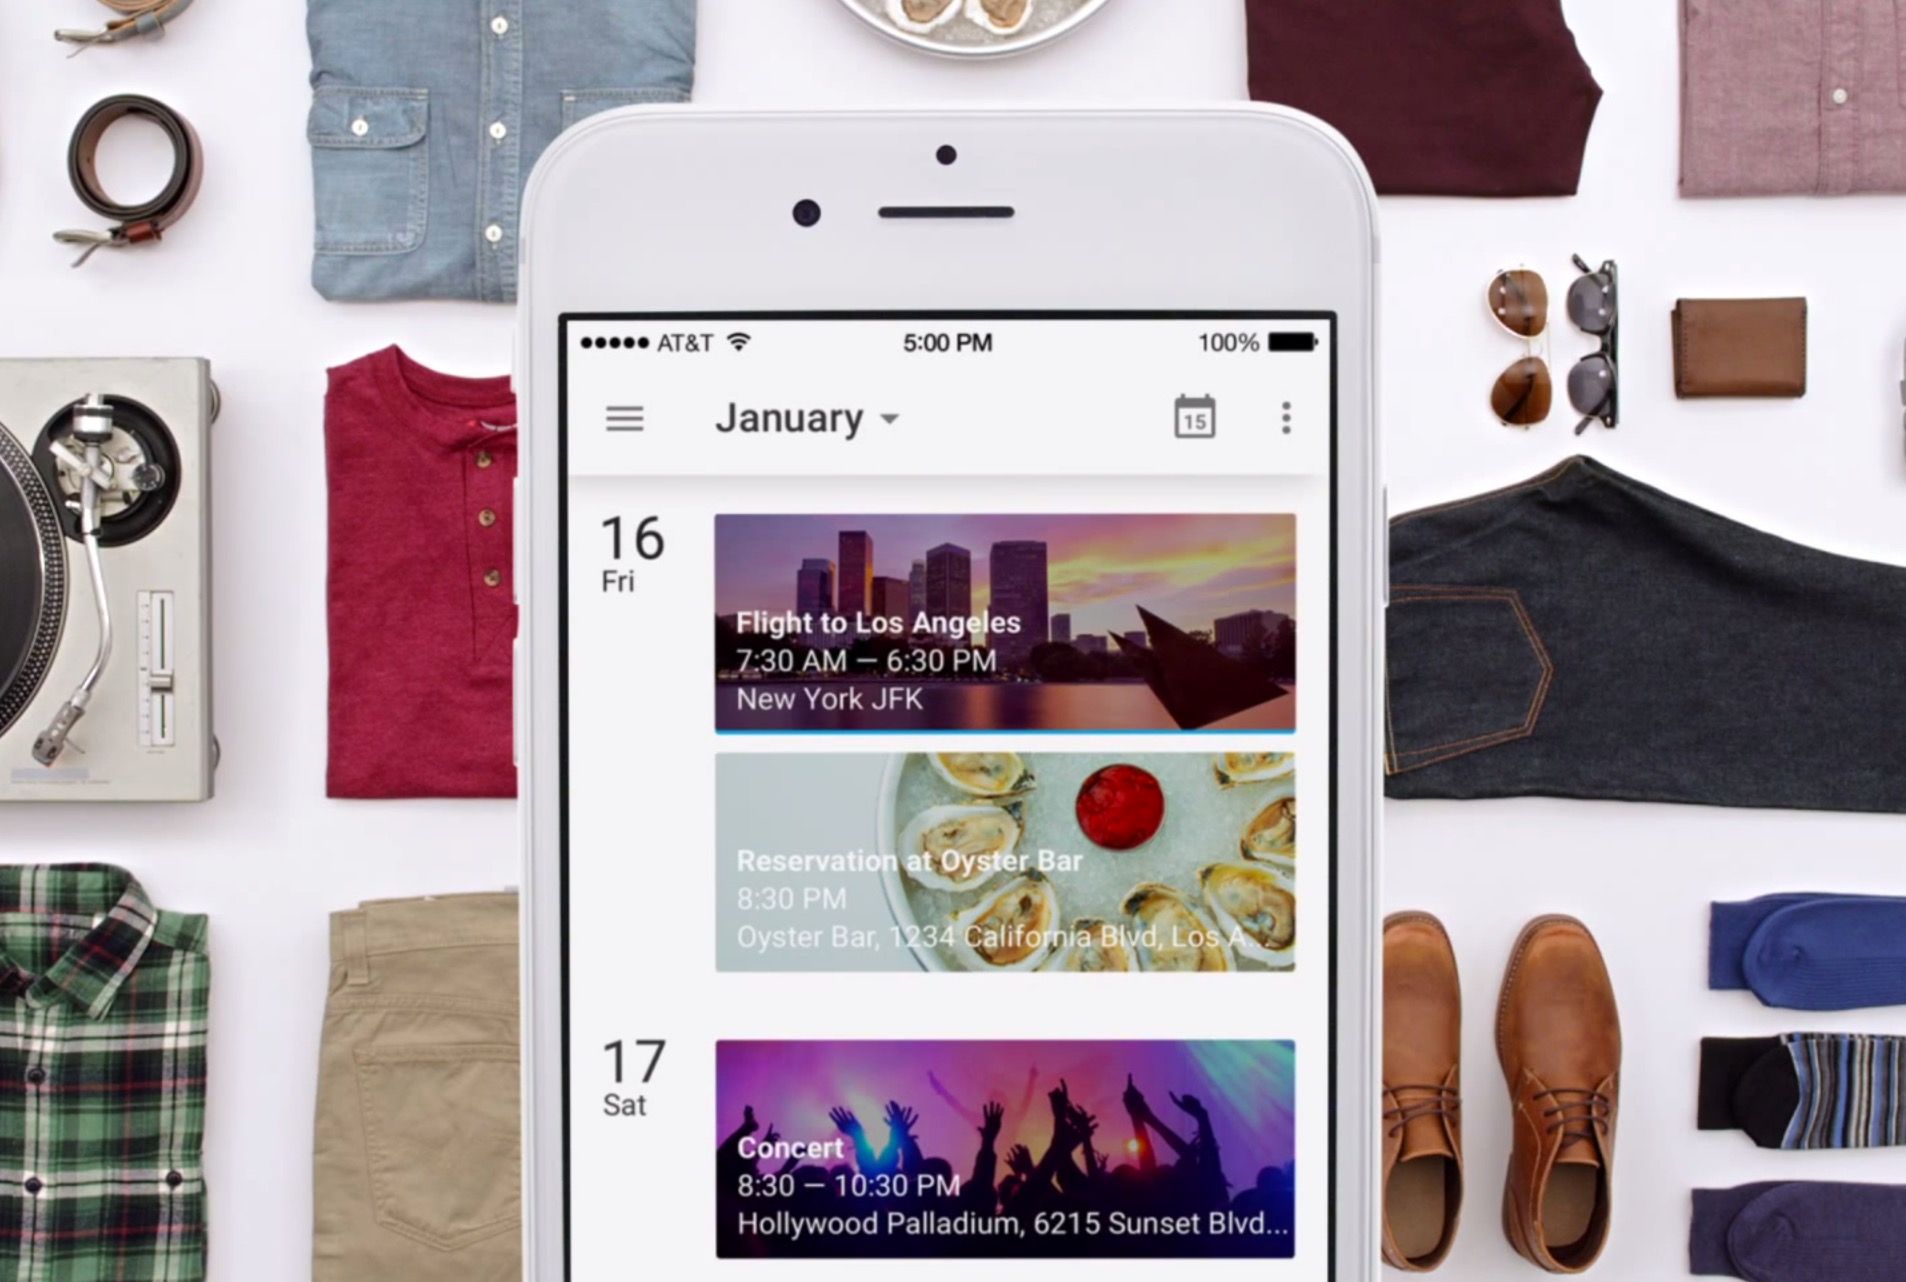 google s new calendar app comes to iphone bringing schedule view and more image 1